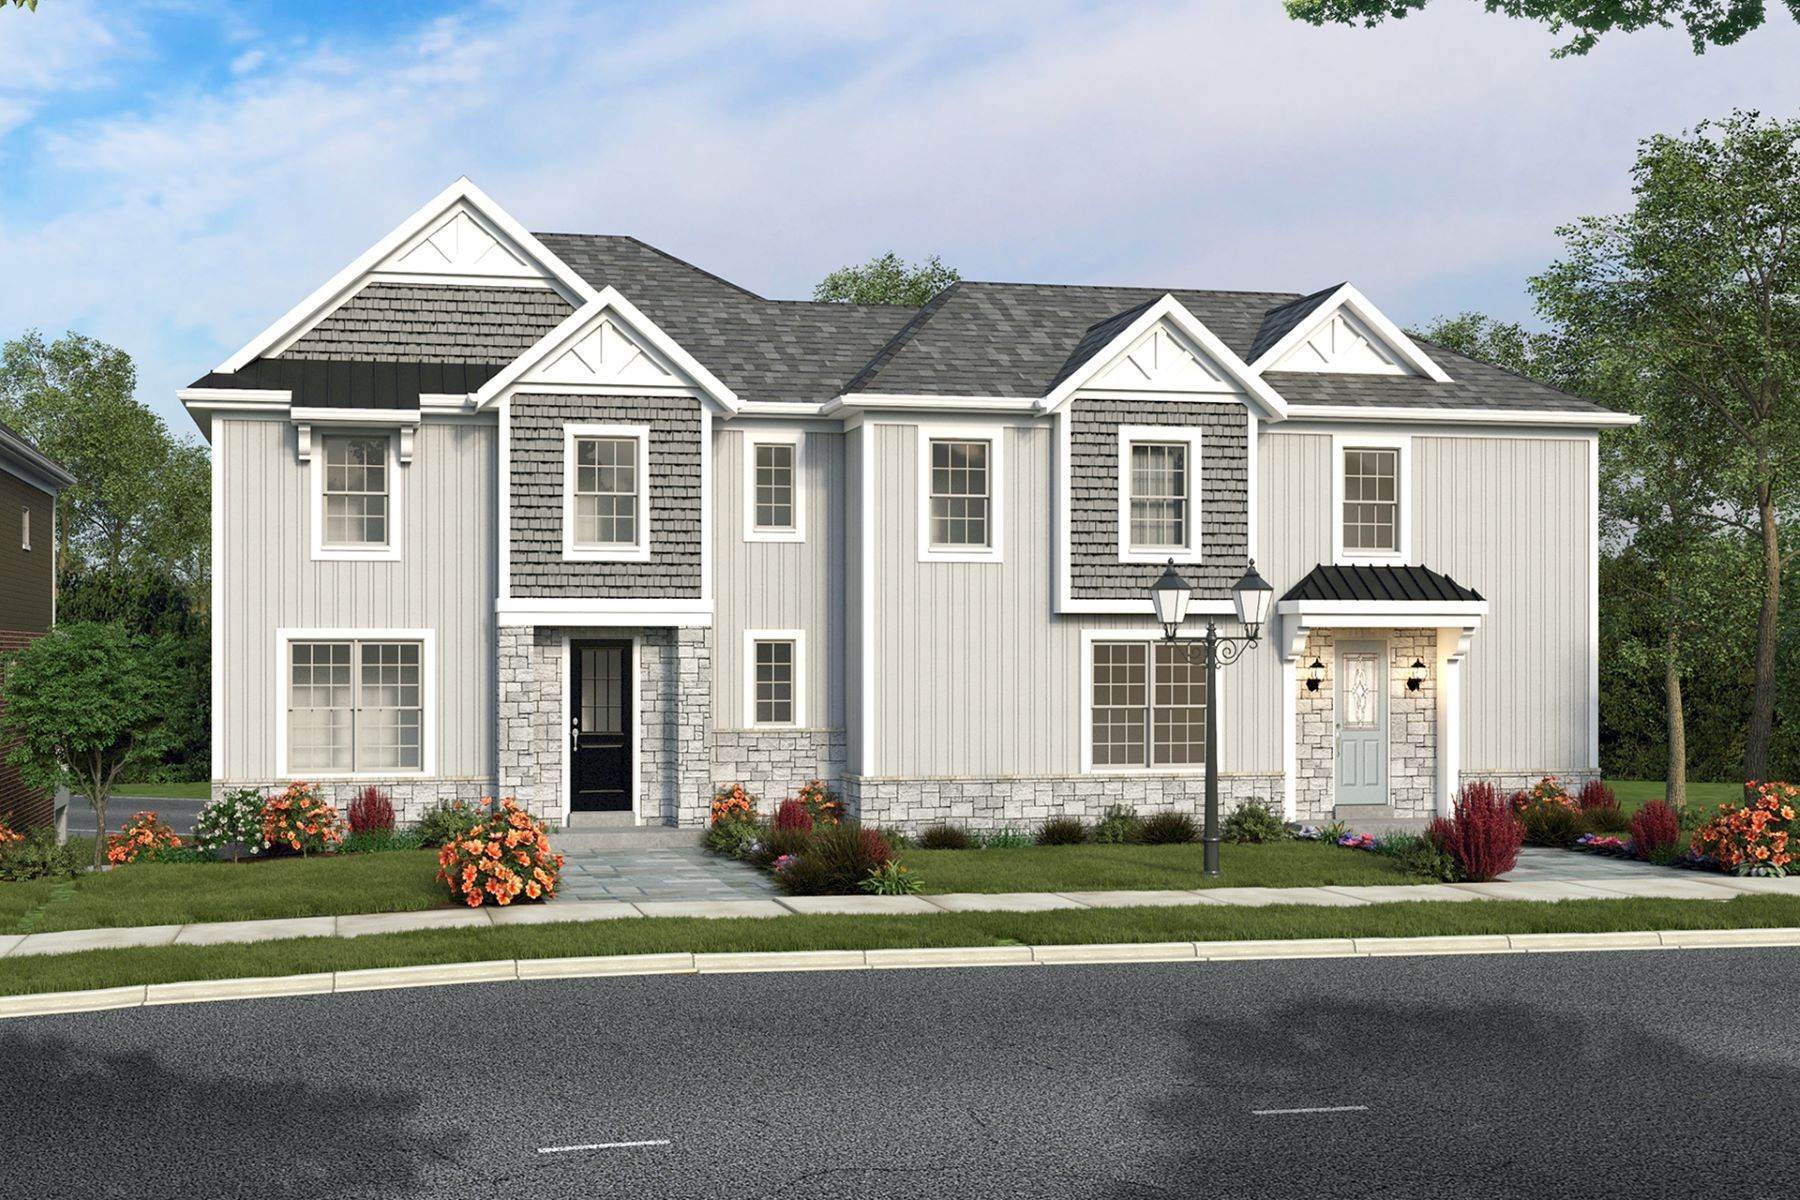 1. townhouses for Sale at Creekside Pointe-Blue Ash's Premiere Lifestyle Community built by Cedar Hill Cus 9320 Old Plainfield Road Blue Ash, Ohio 45236 United States